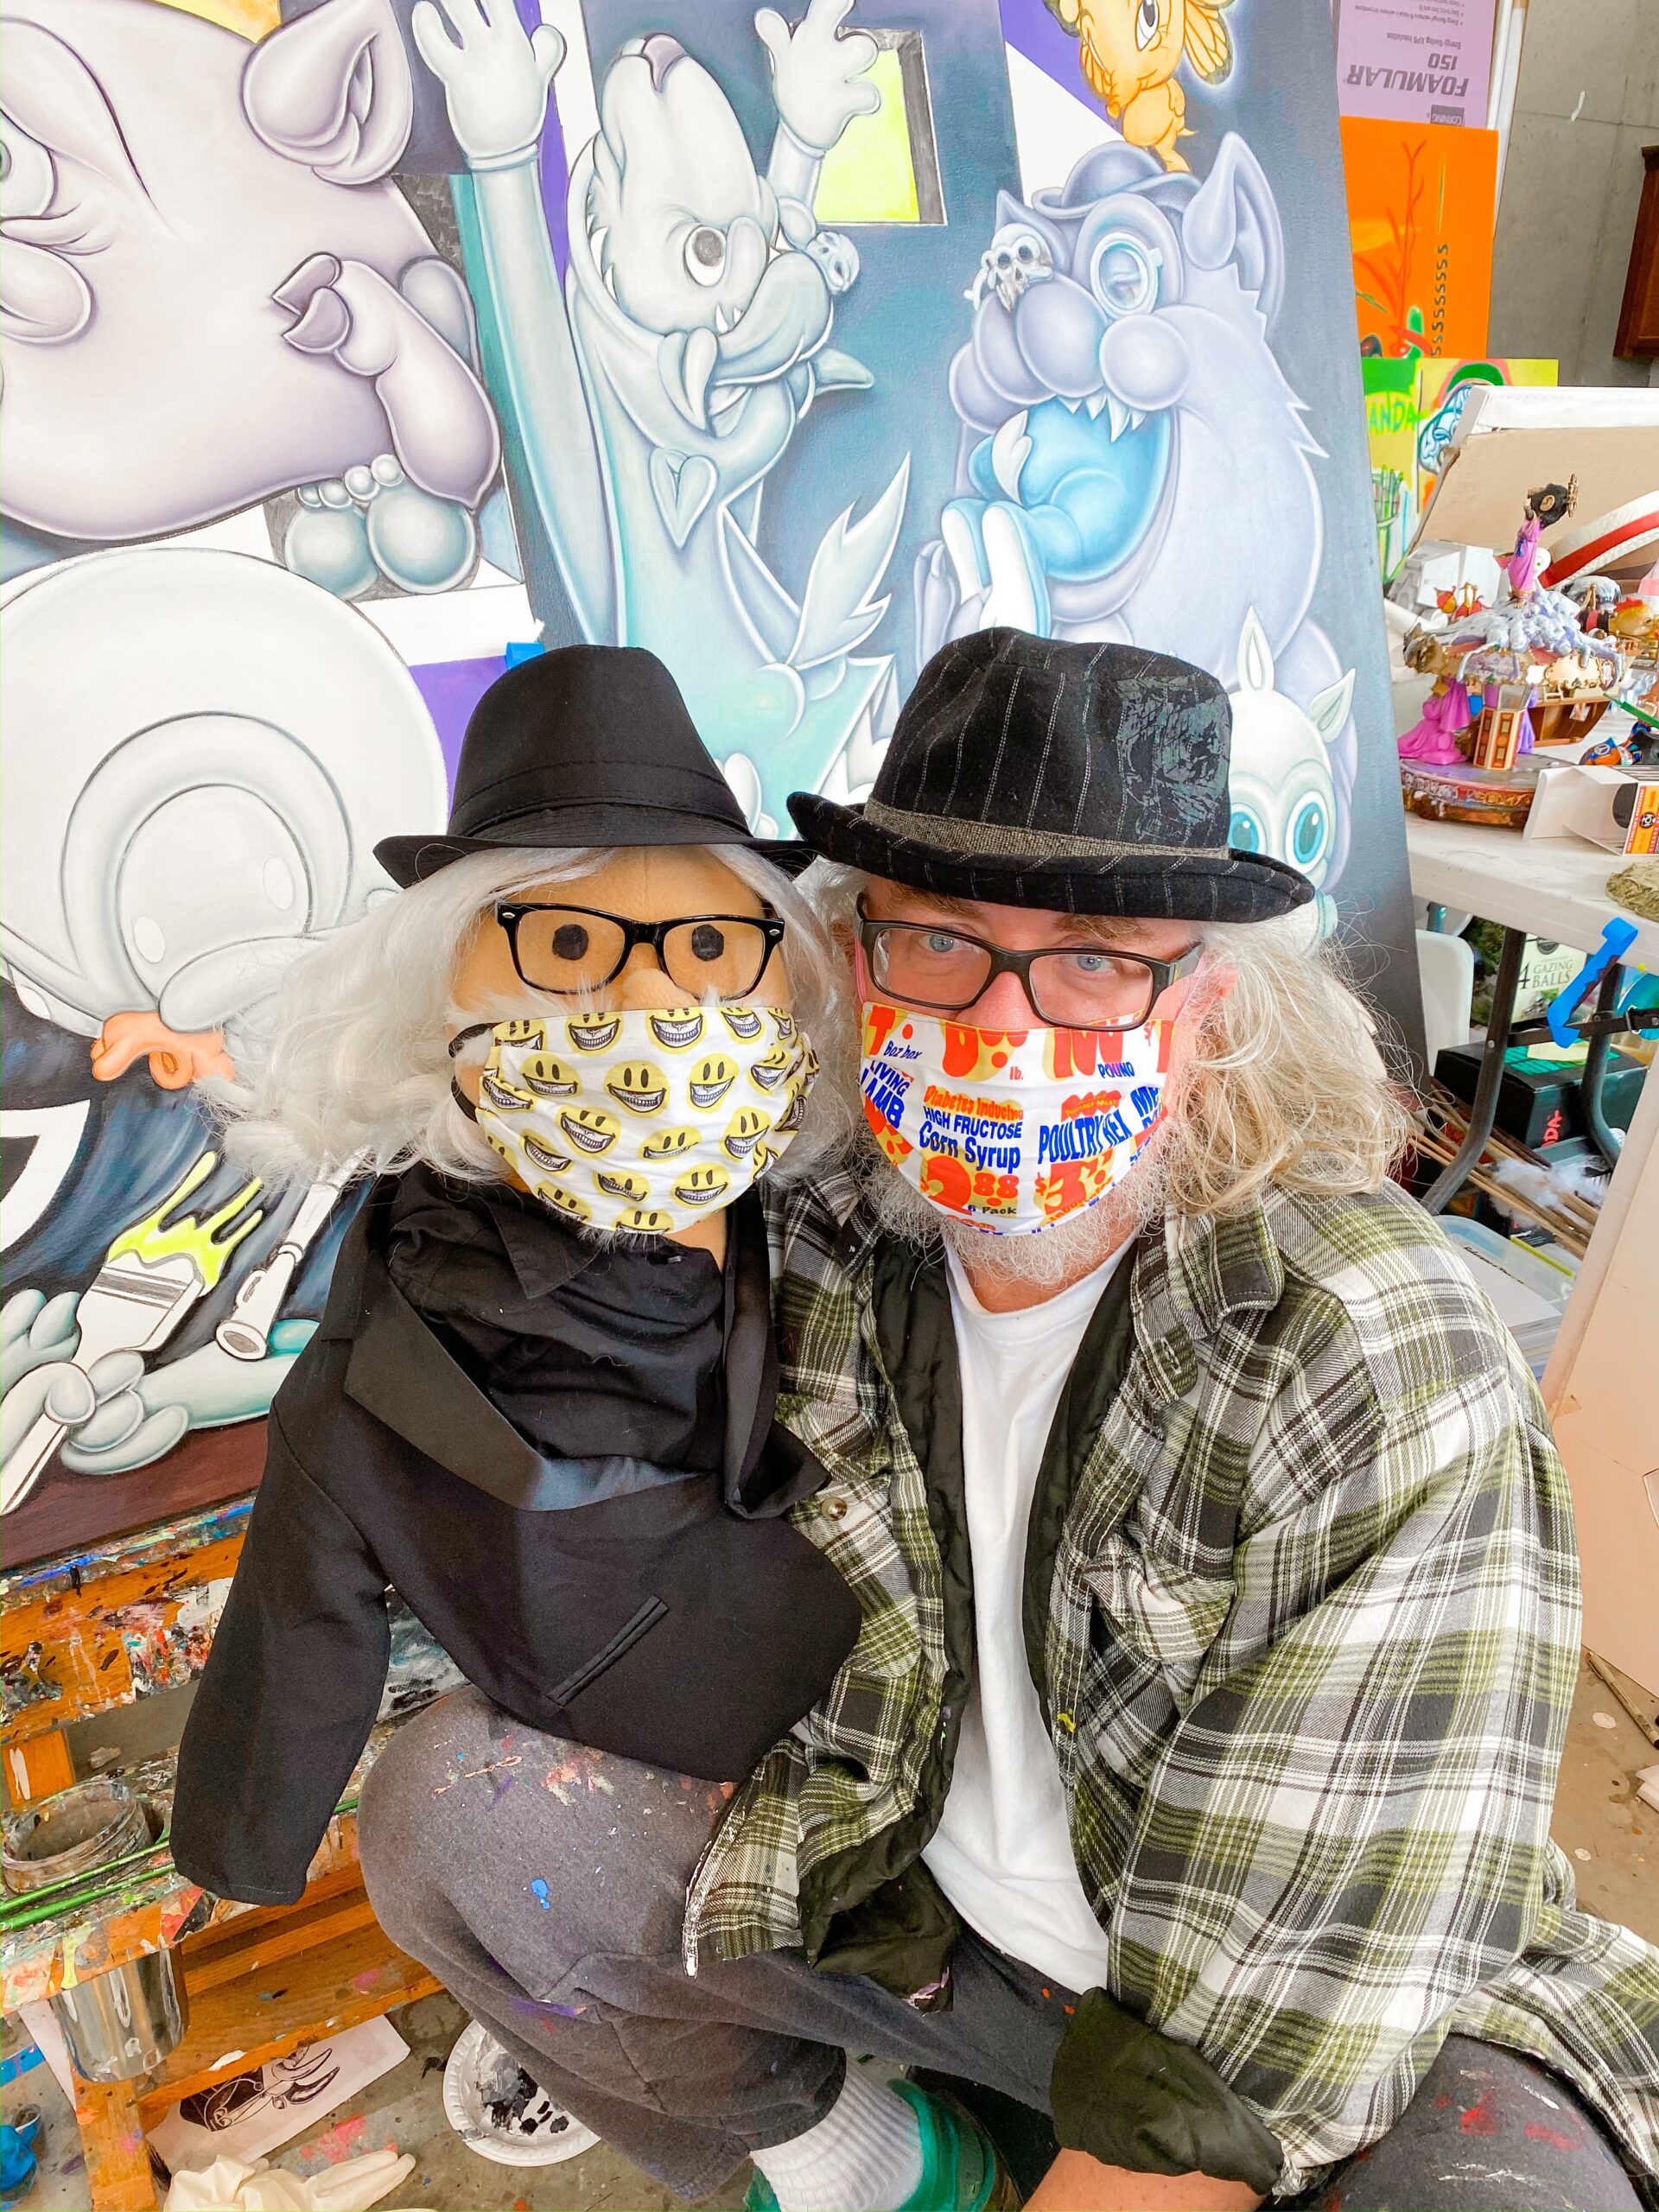 Ron English selling Face Masks for a Great Cause! – StreetArtNews